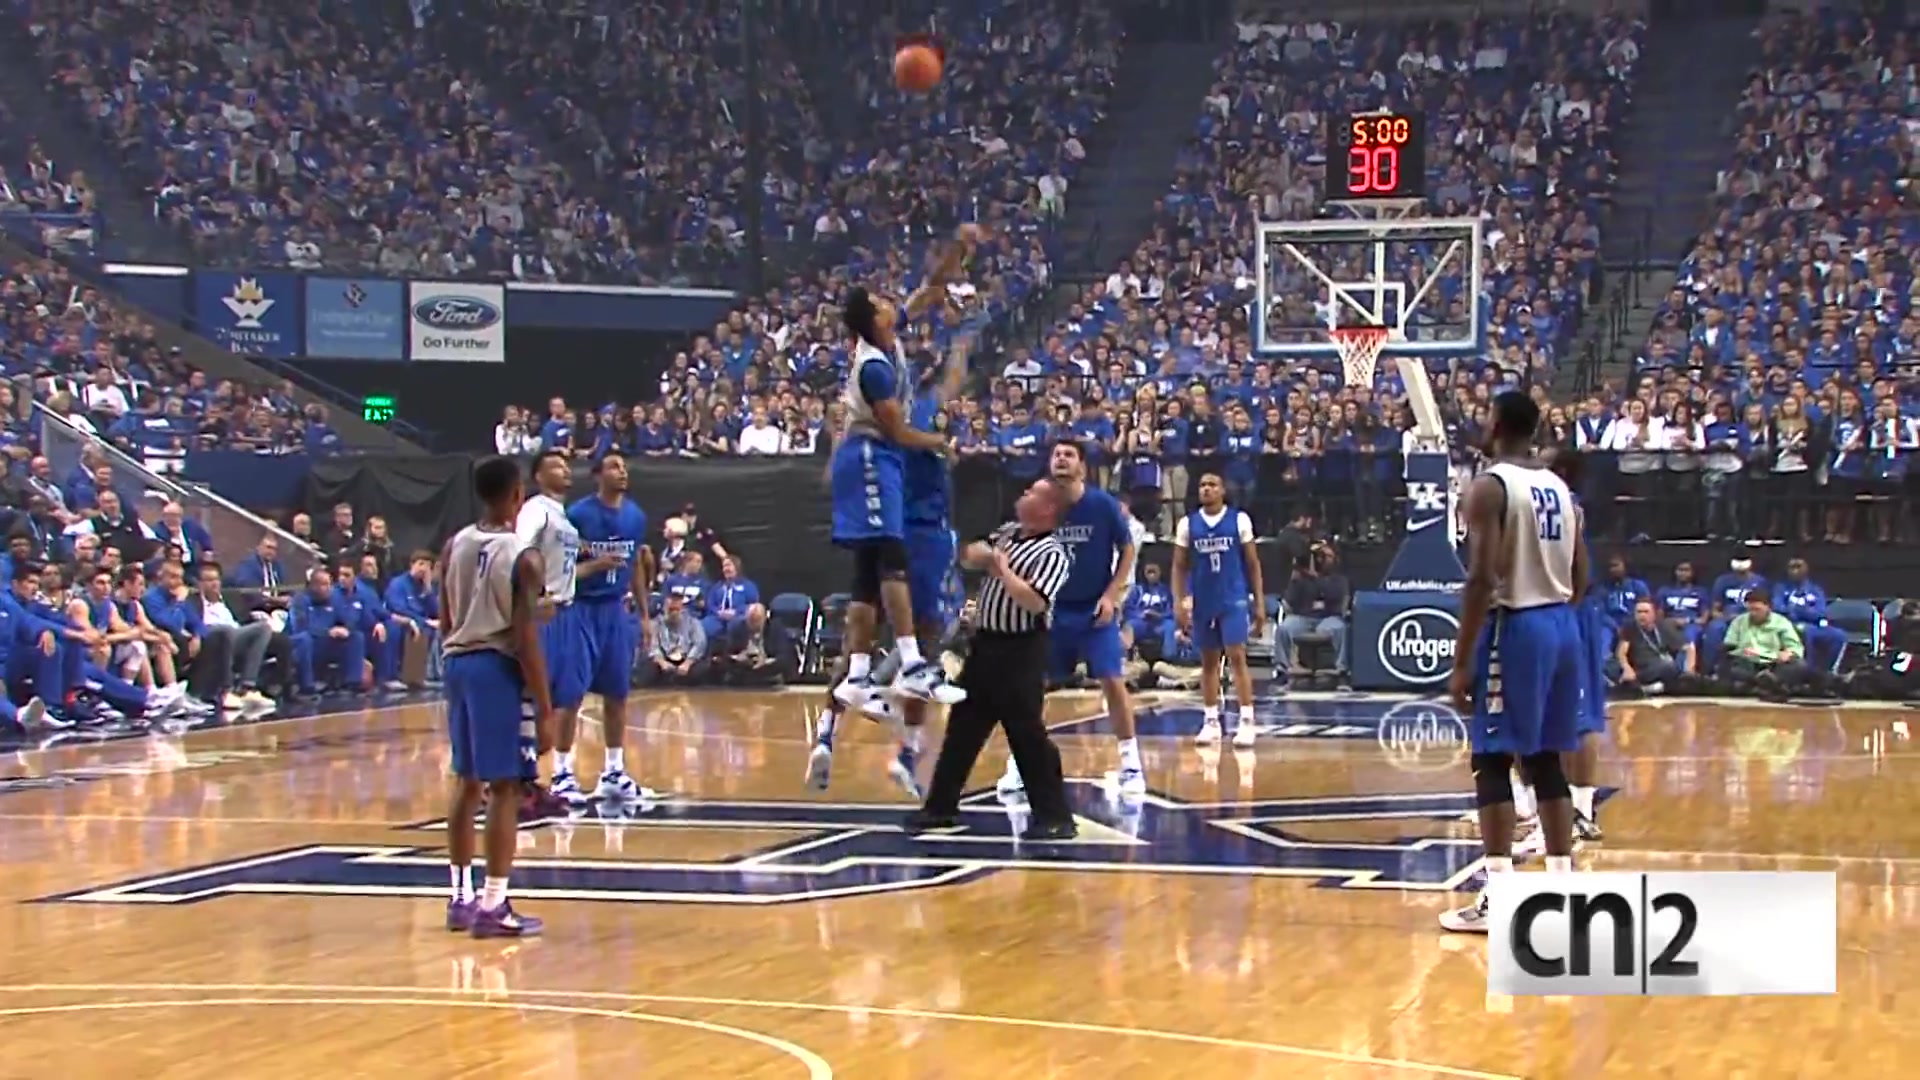 Big Blue Madness 2015 Scrimmage Highlights